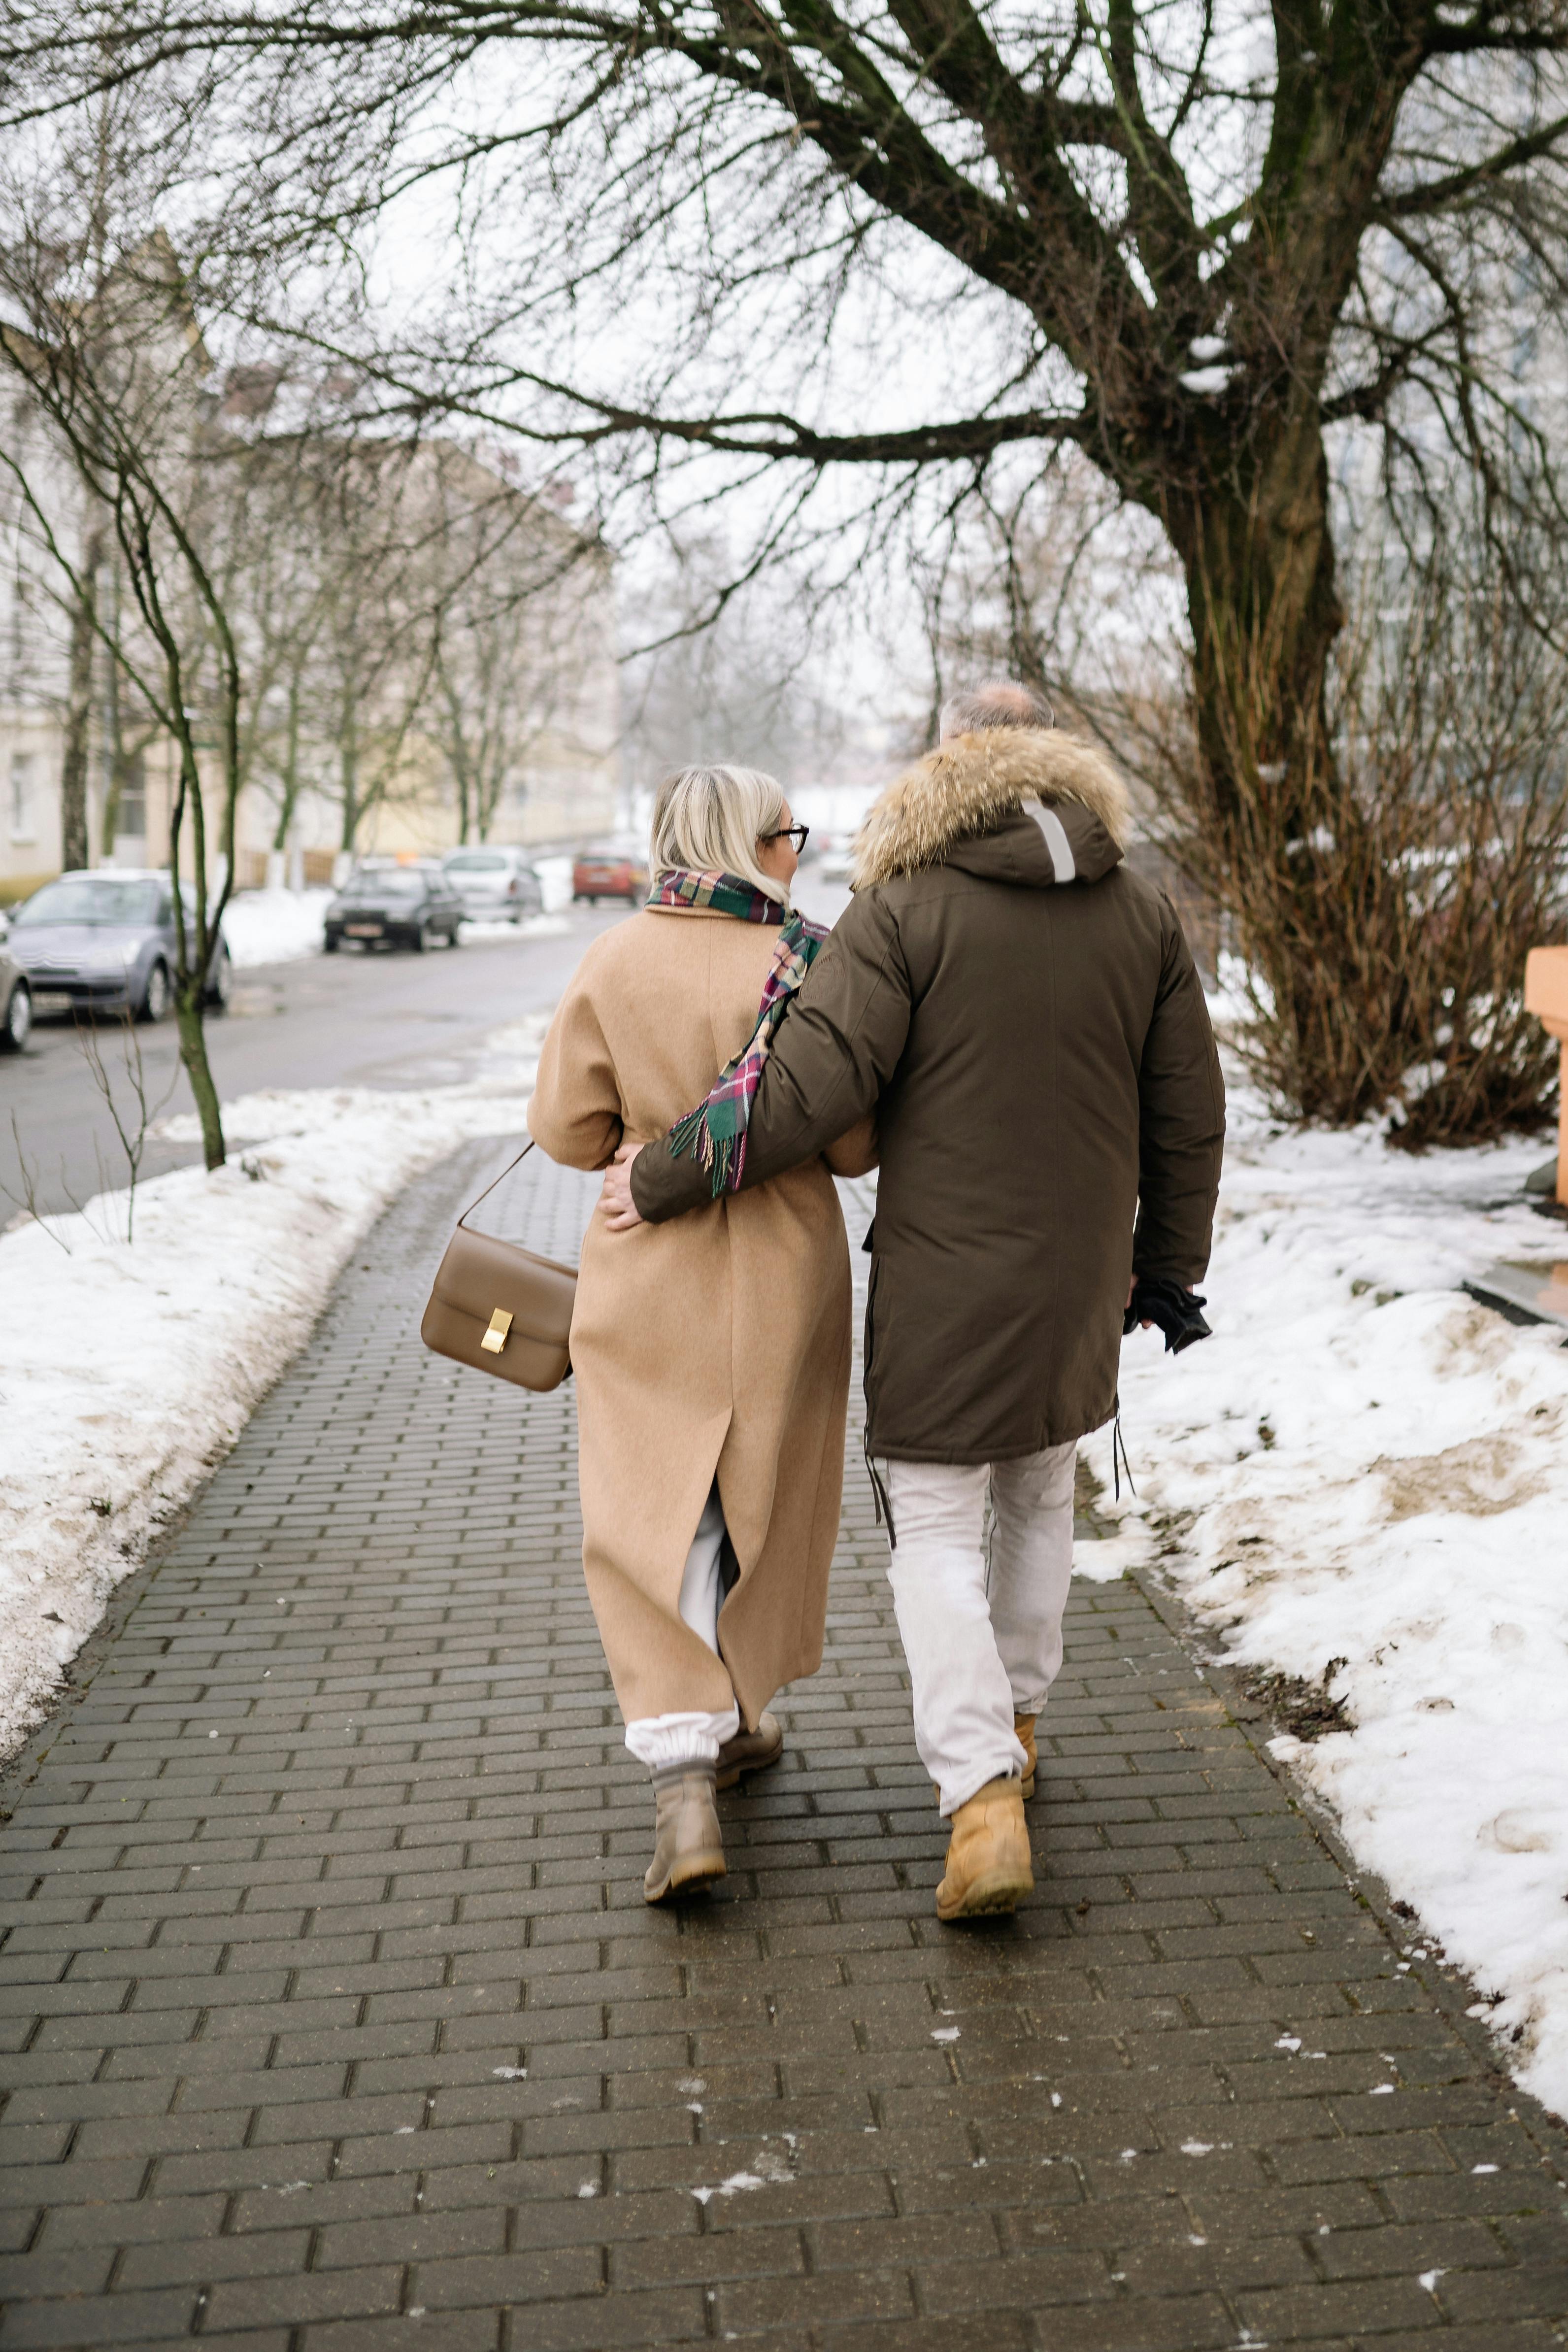 Old Couple Walking Photos, Download The BEST Free Old Couple Walking ...